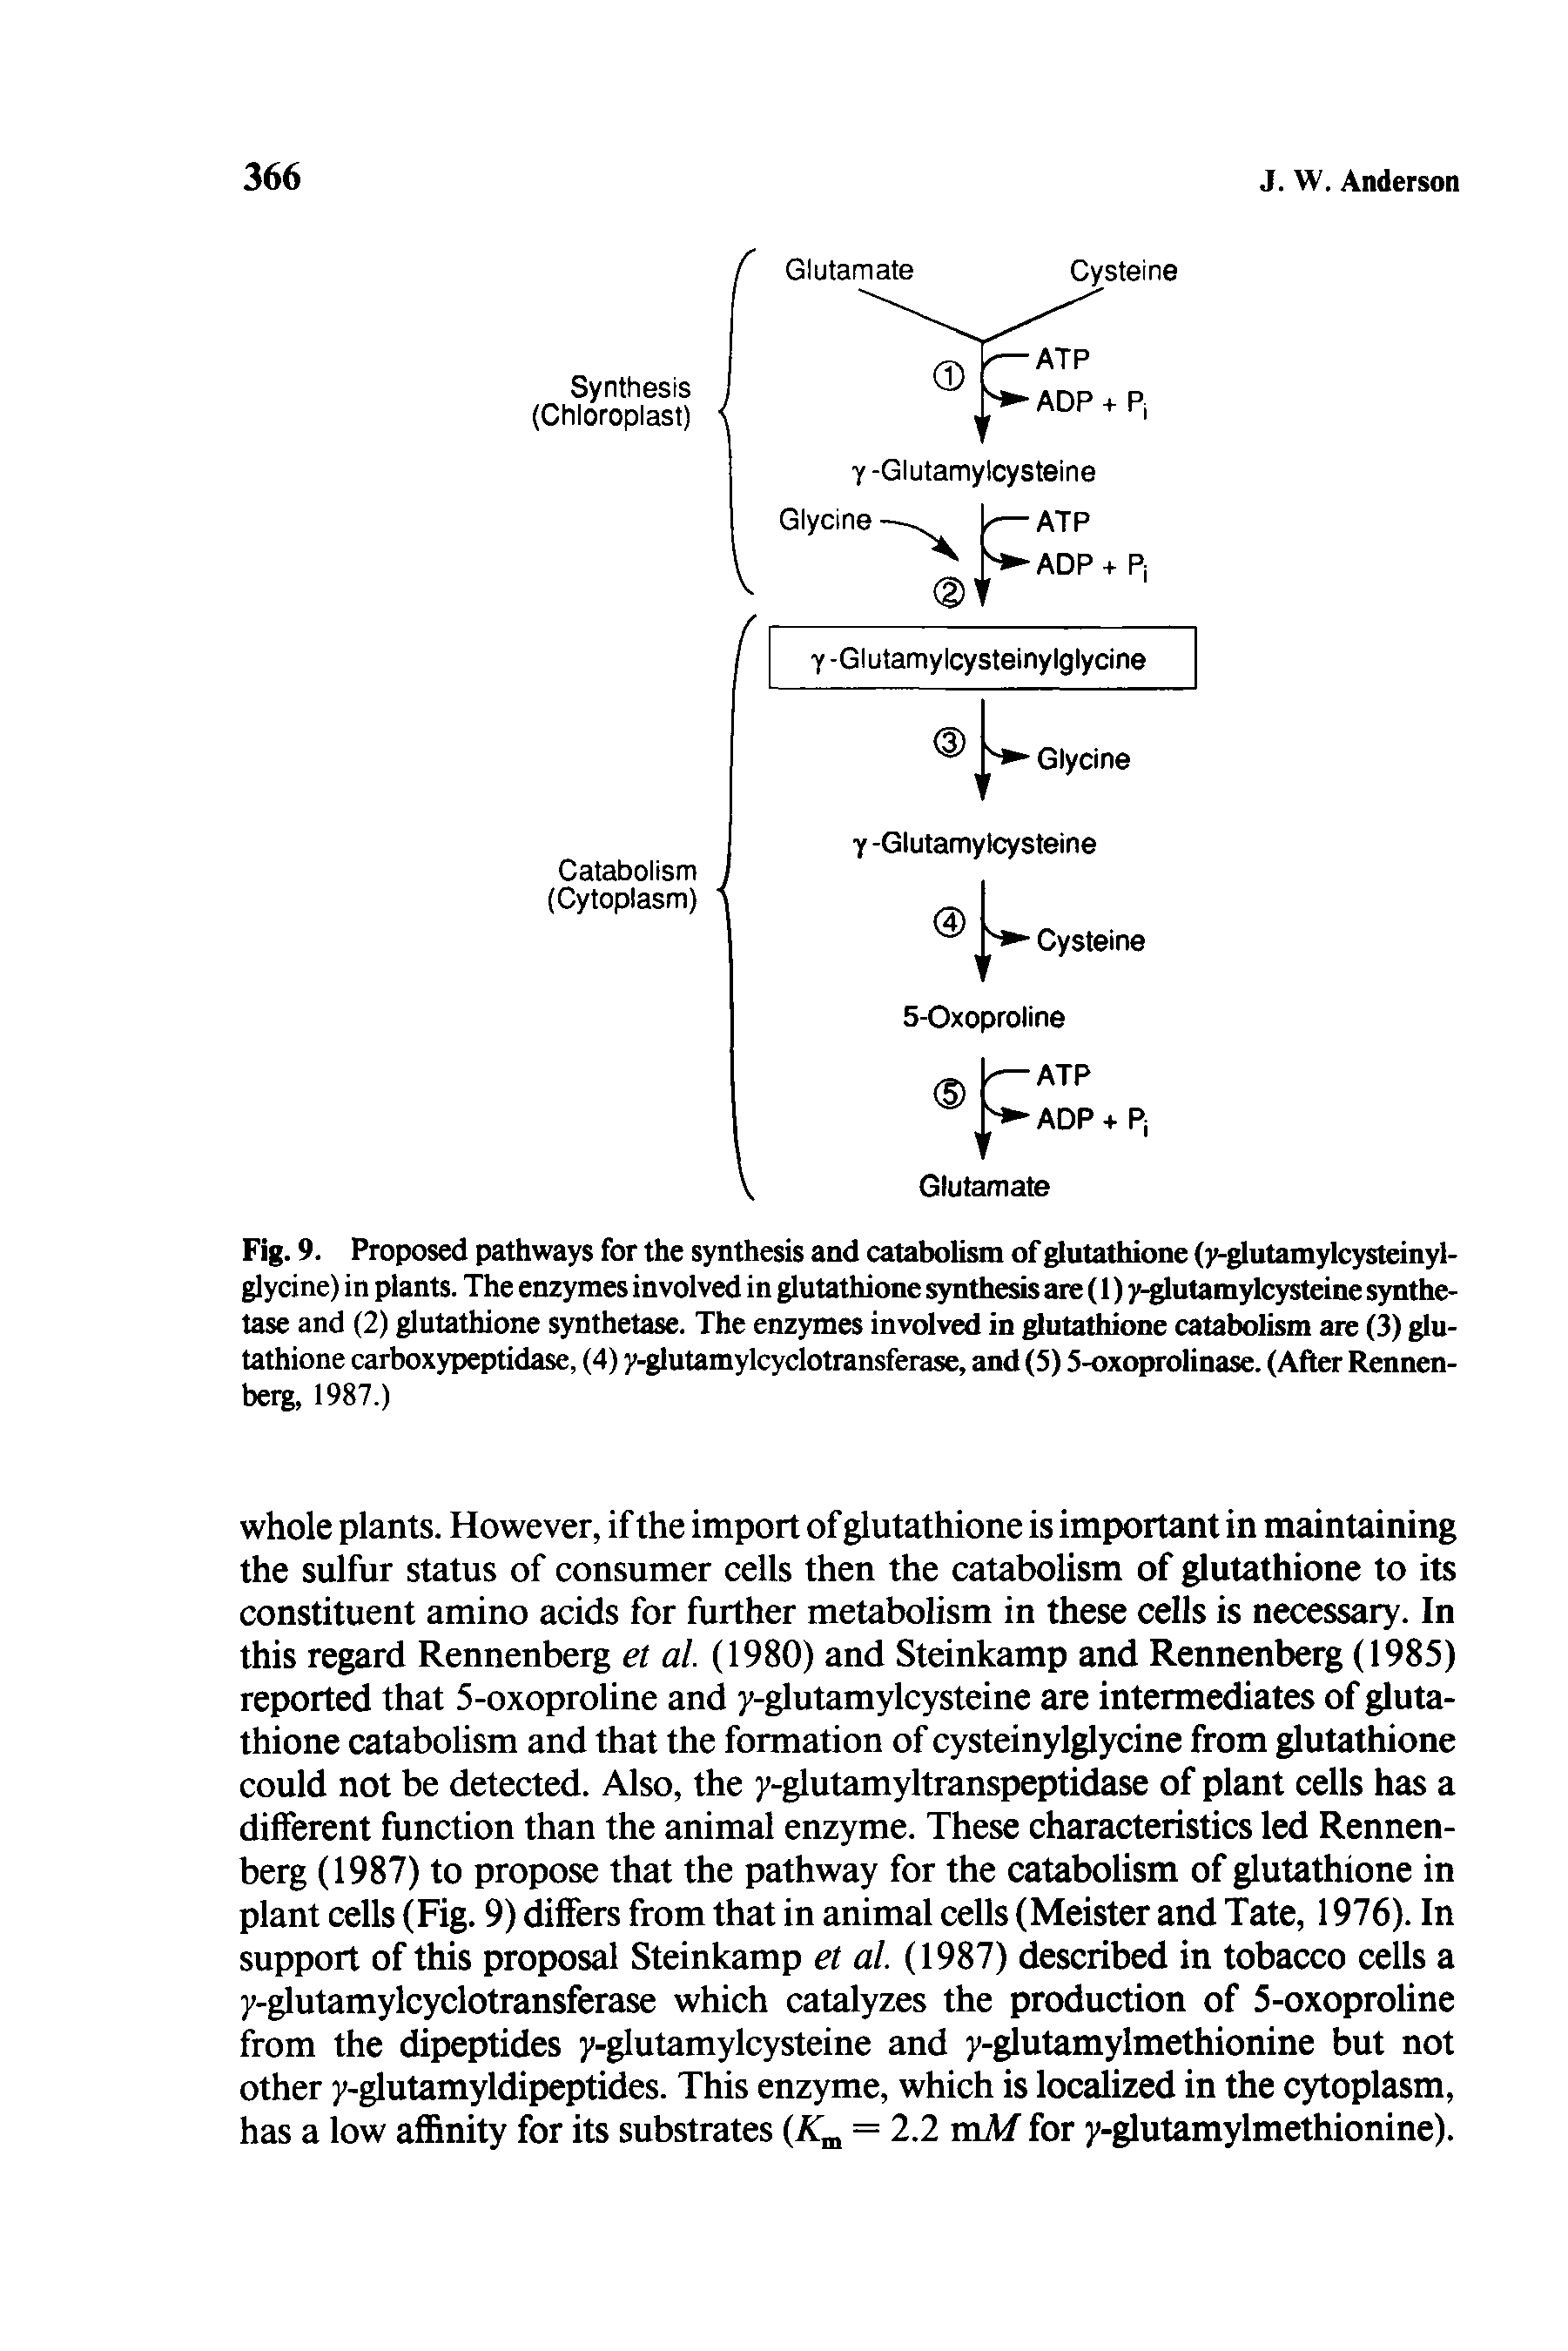 Fig. 9. Proposed pathways for the synthesis and catabolism of glutathione (y-glutamylcysteinyl-glycine) i n plants. The enzymes involved in glutathione synthesis are (1) >.glutamylcysteine synthetase and (2) glutathione synthetase. The enzymes involved in glutathione catabolism are (3) glutathione carboxypeptidase, (4) yglutamylcyclotransferase, and (5) 5-oxoprolinase. (After Rennen-beig, 1987.)...